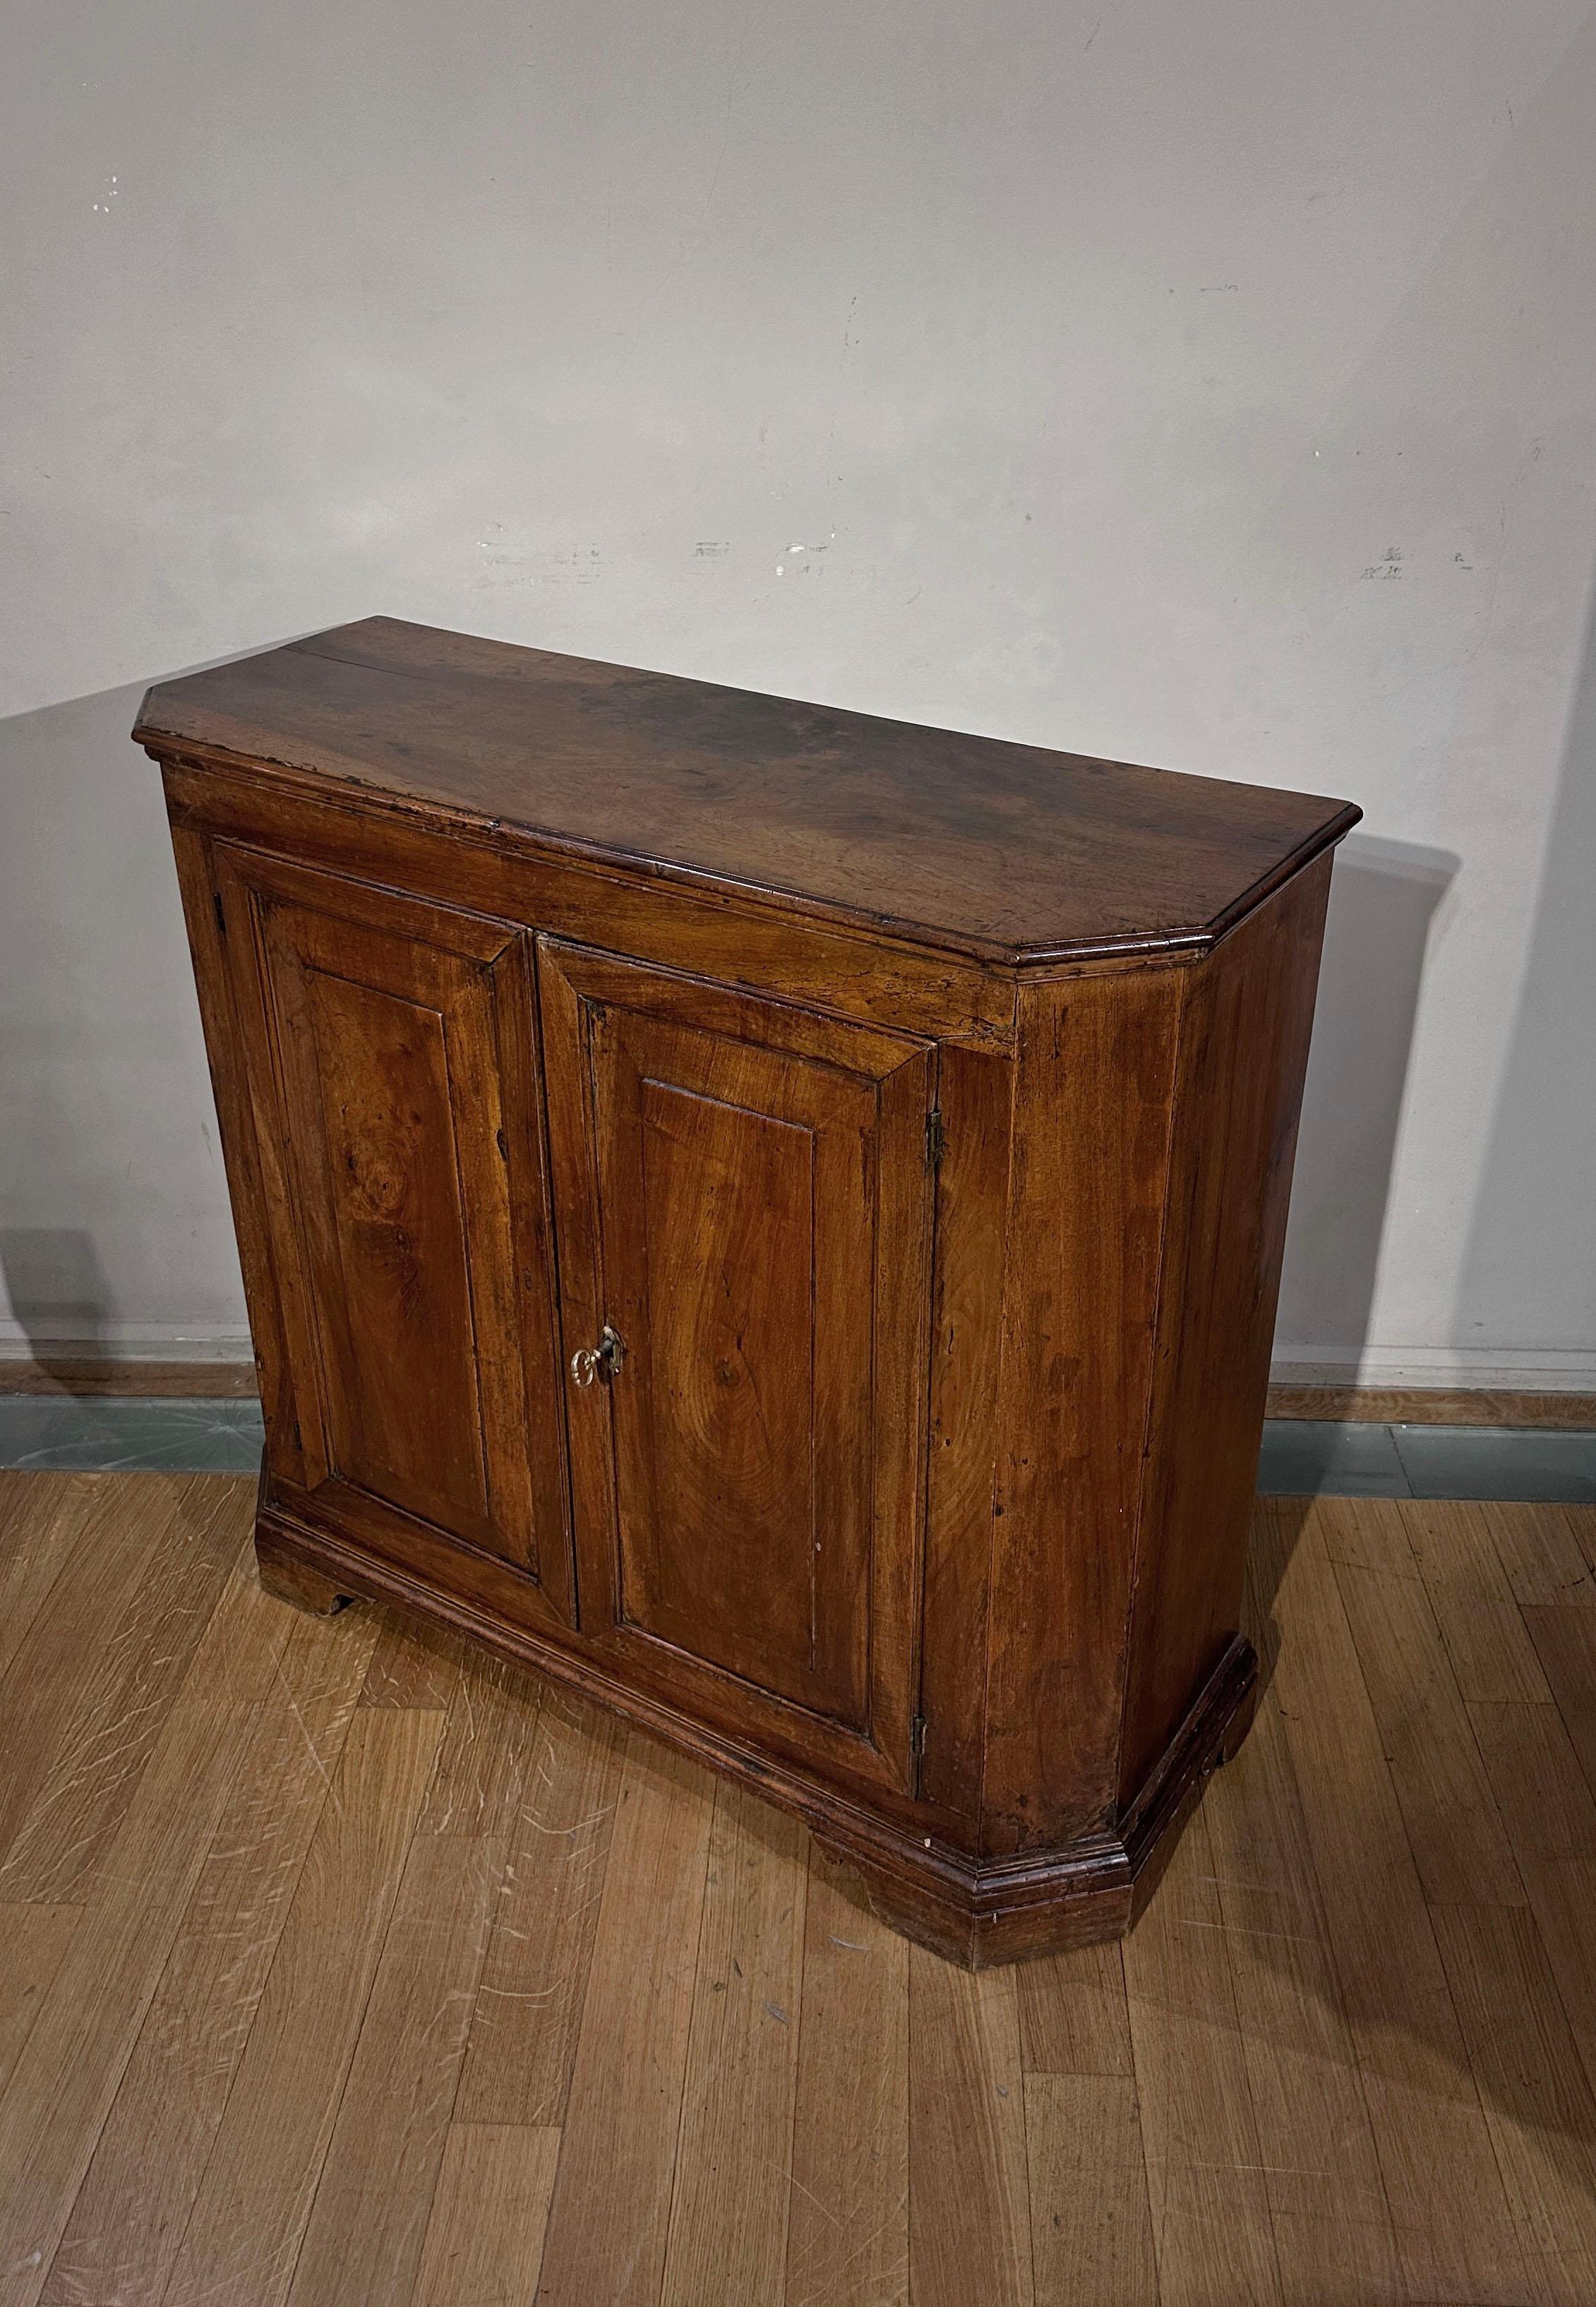 Hand-Carved 18th CENTURY VENETIAN SMALL SIDEBOARD For Sale